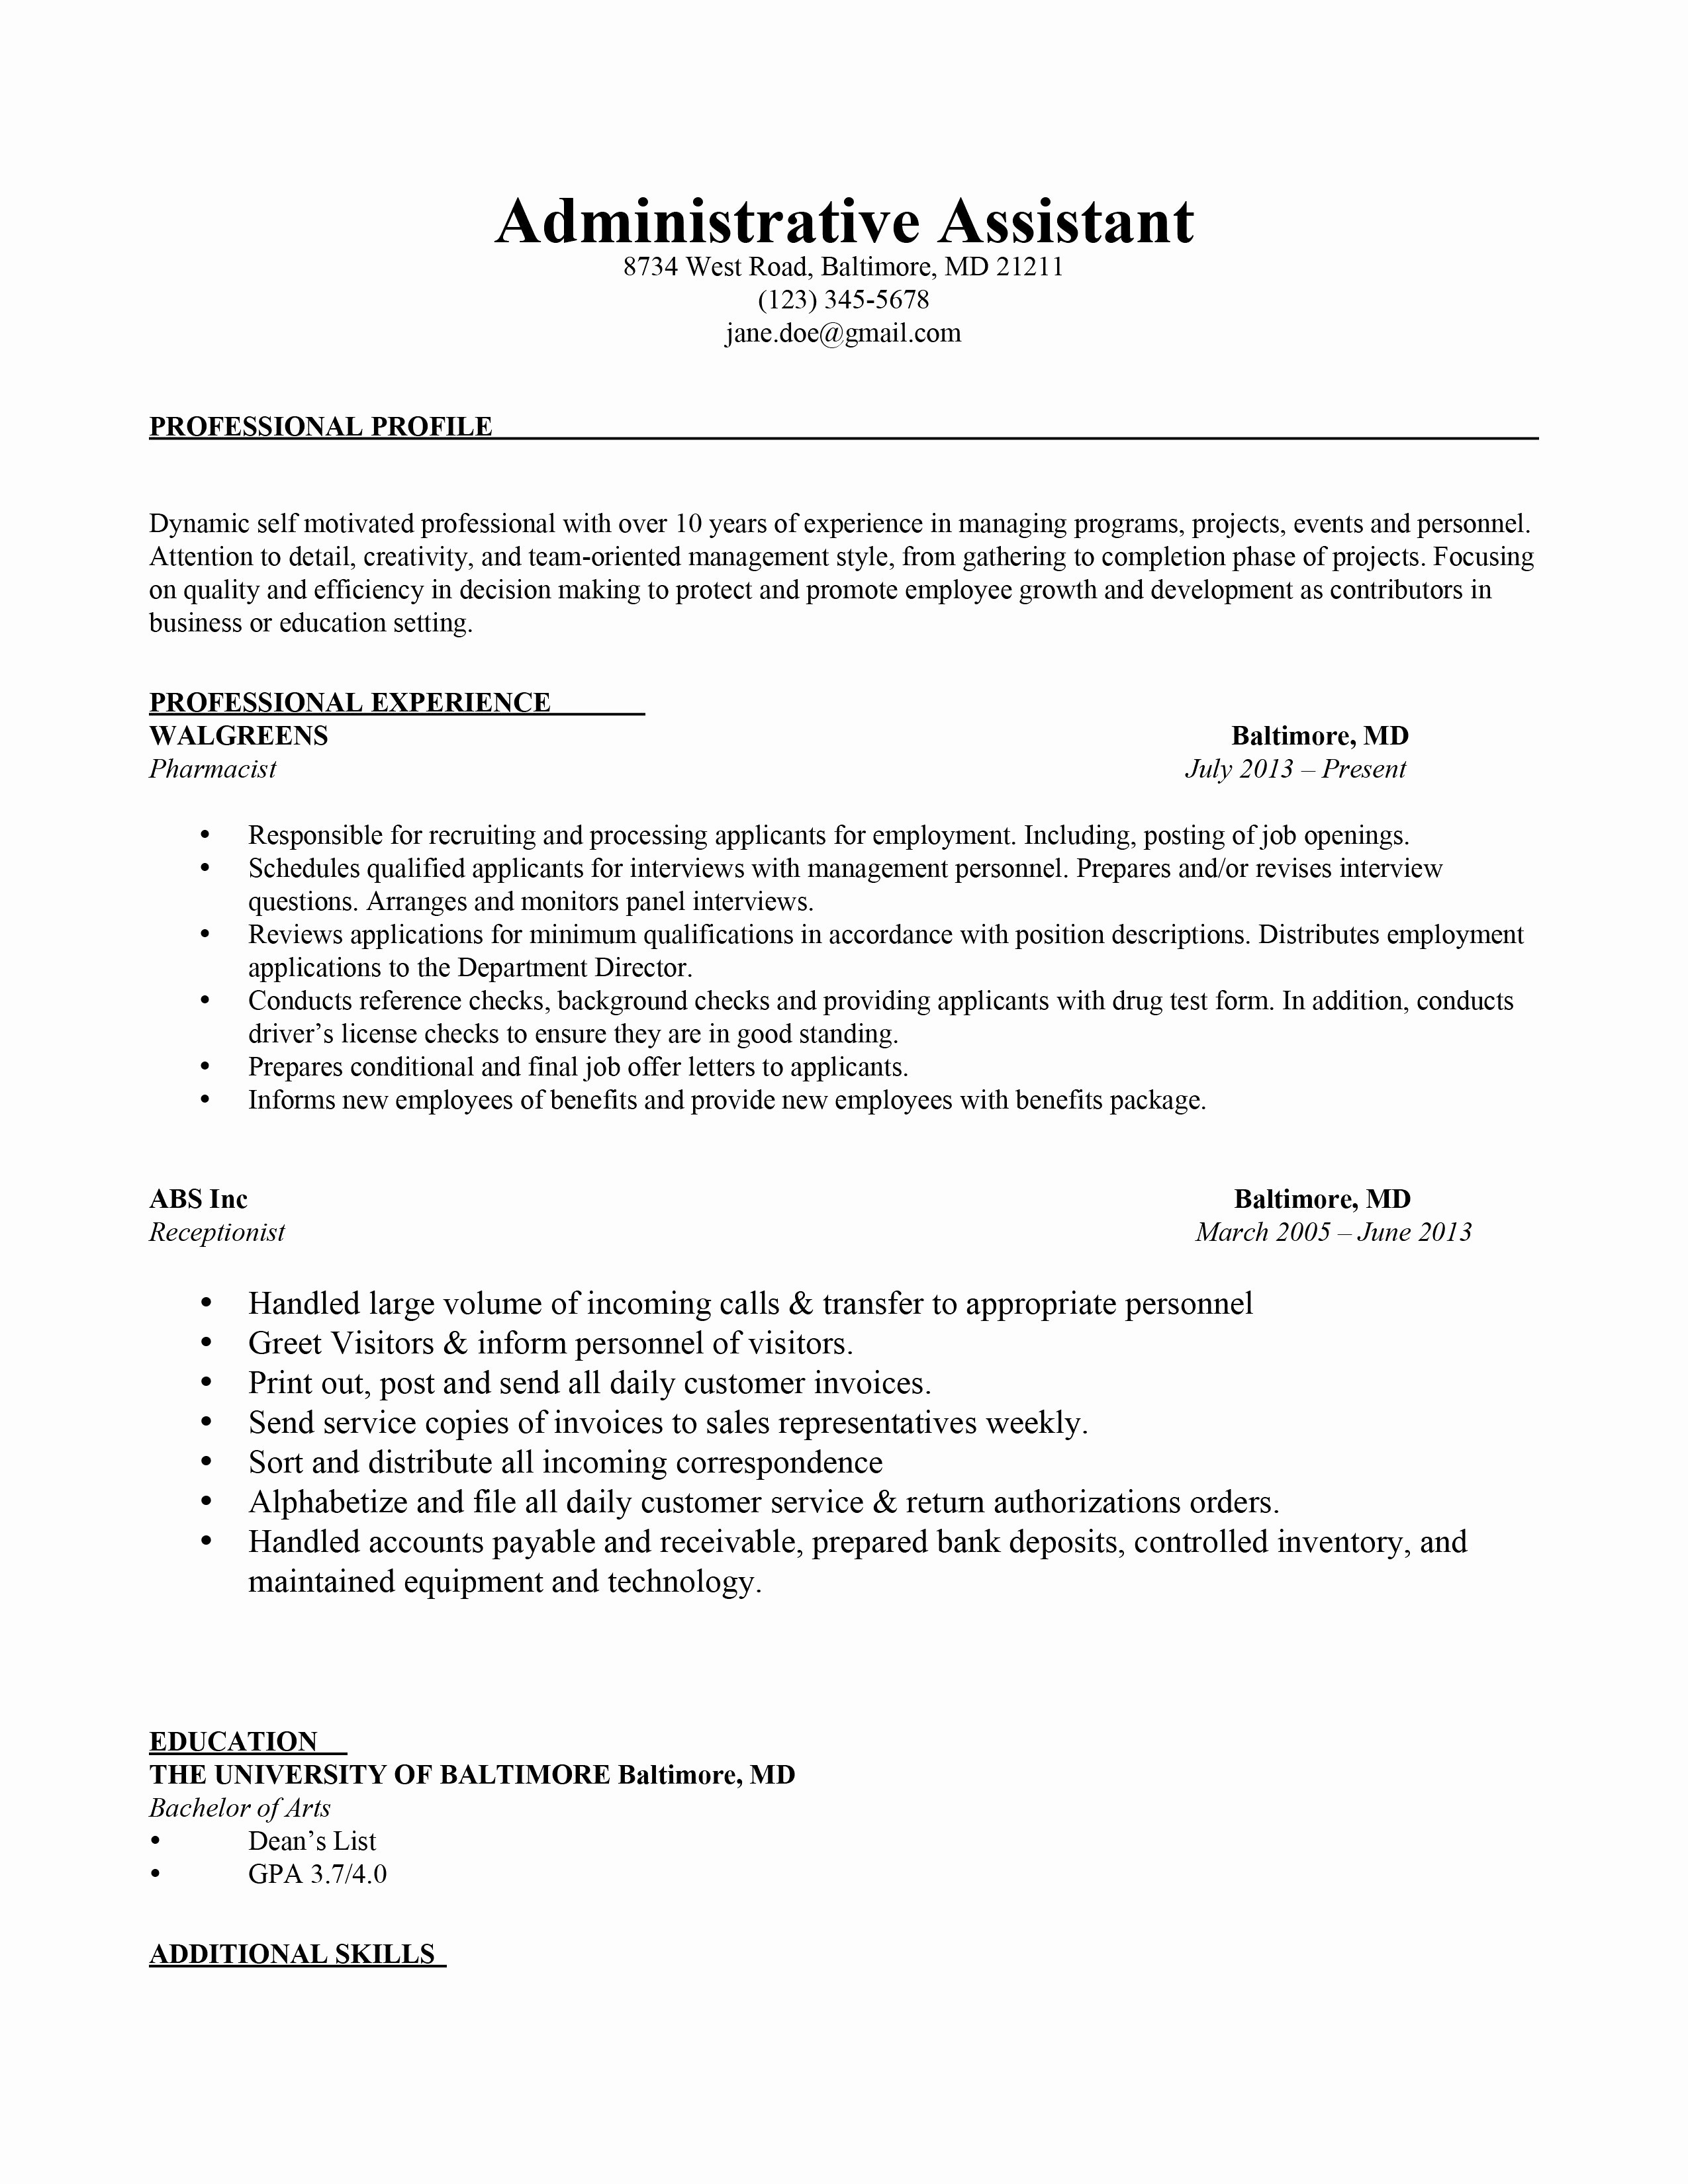 Administrative Assistant Cover Letters Sample Resume Administrative Assistant Cover Letter New Cover Letter